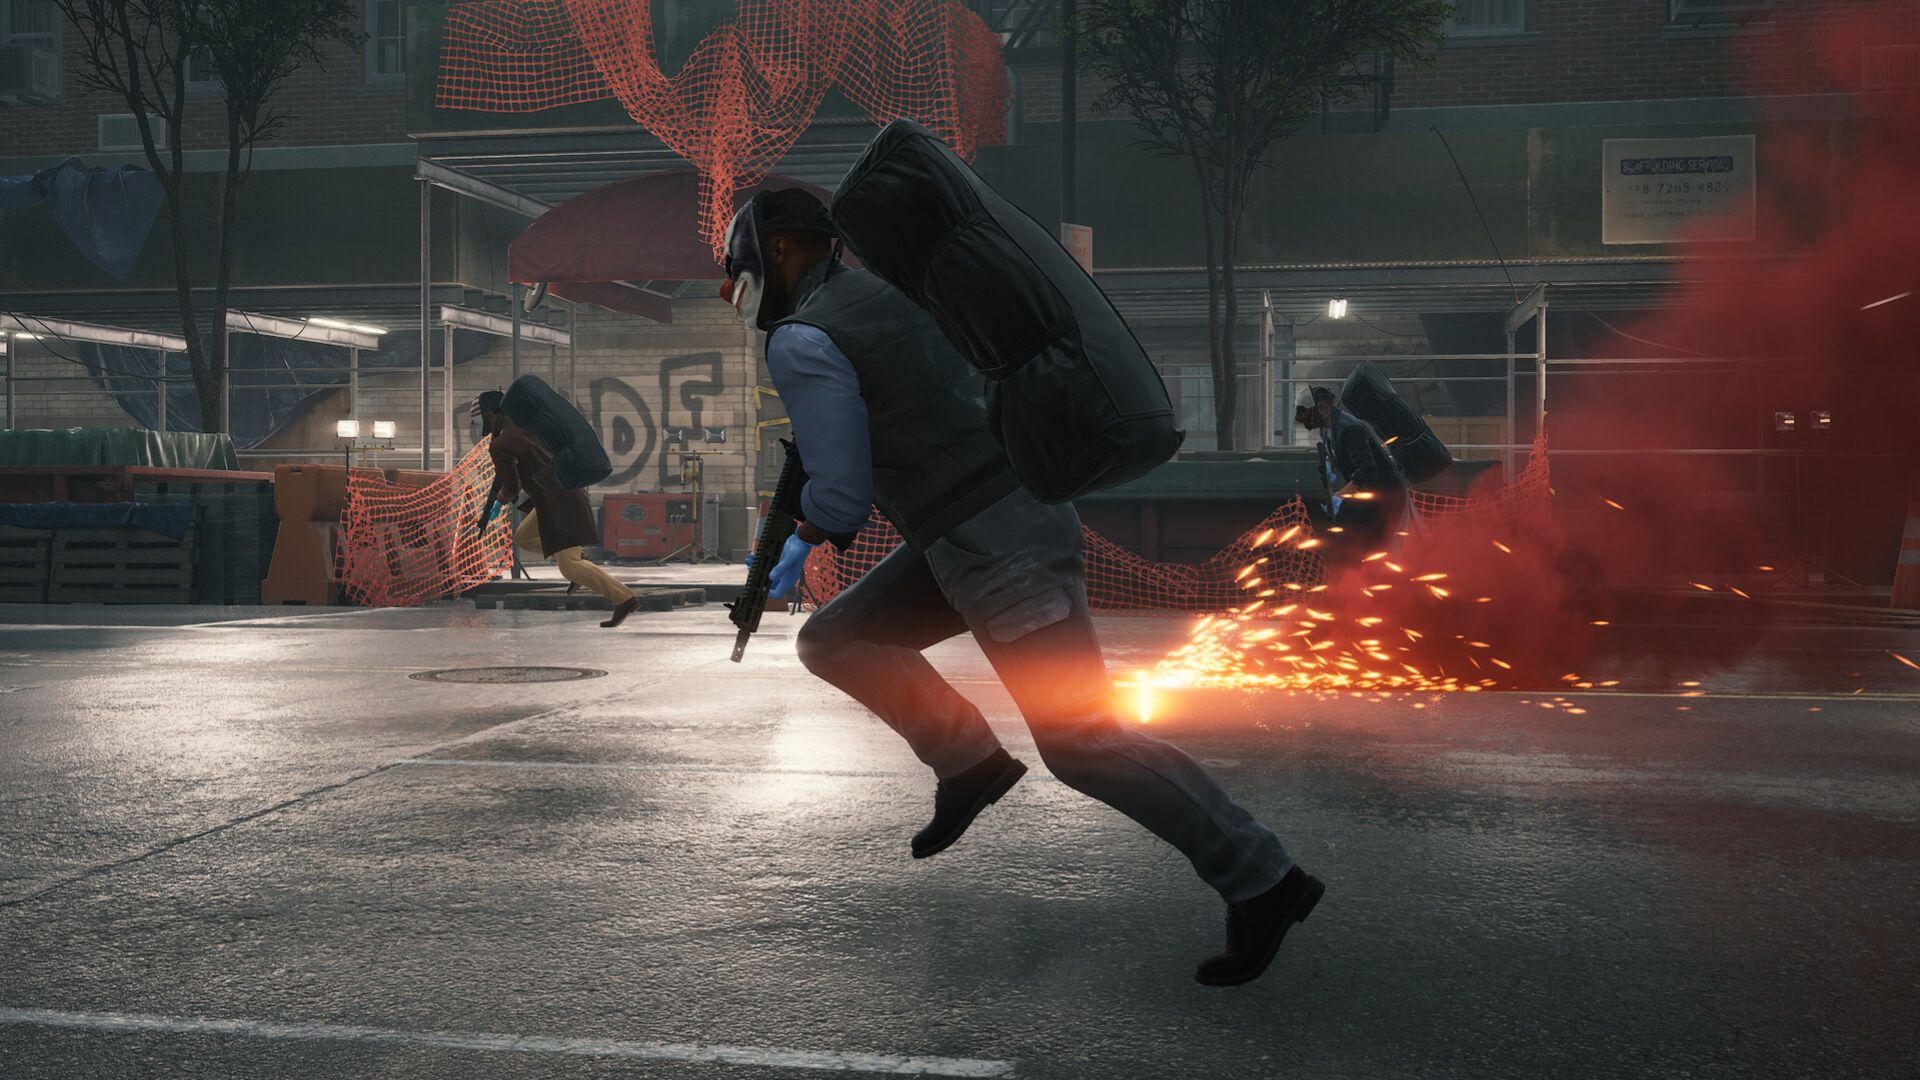 A robber runs with loot strapped to their backs, as red flares smoke in the background